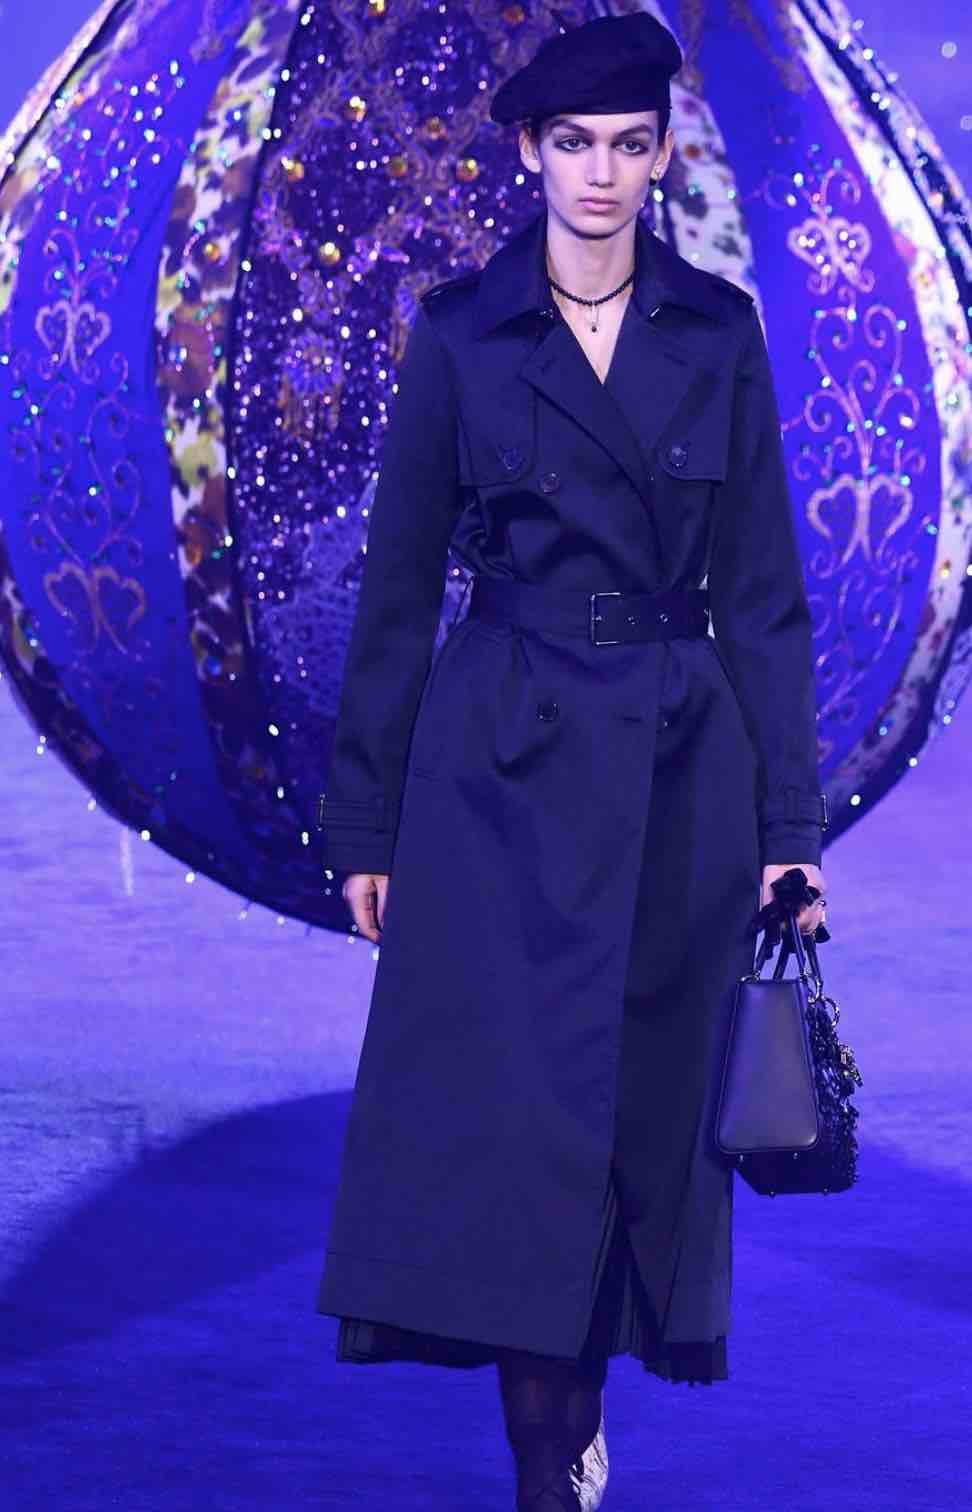 This Look By Christian Dior Is One of The Top 10 Fall Winter 2023 Fashion Trends That Will Be Popular